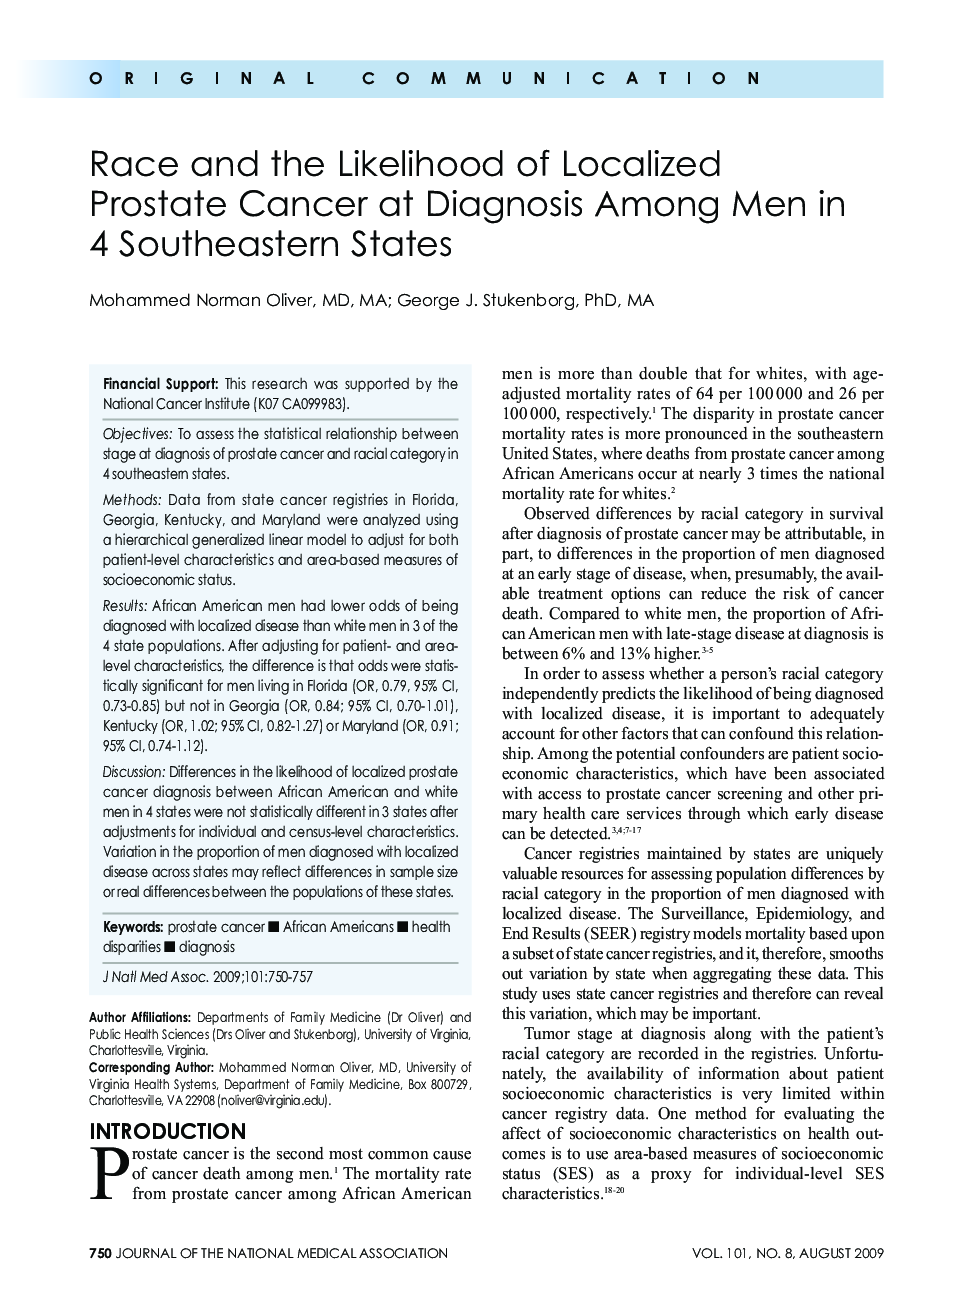 Race and the Likelihood of Localized Prostate Cancer at Diagnosis Among Men in 4 Southeastern States